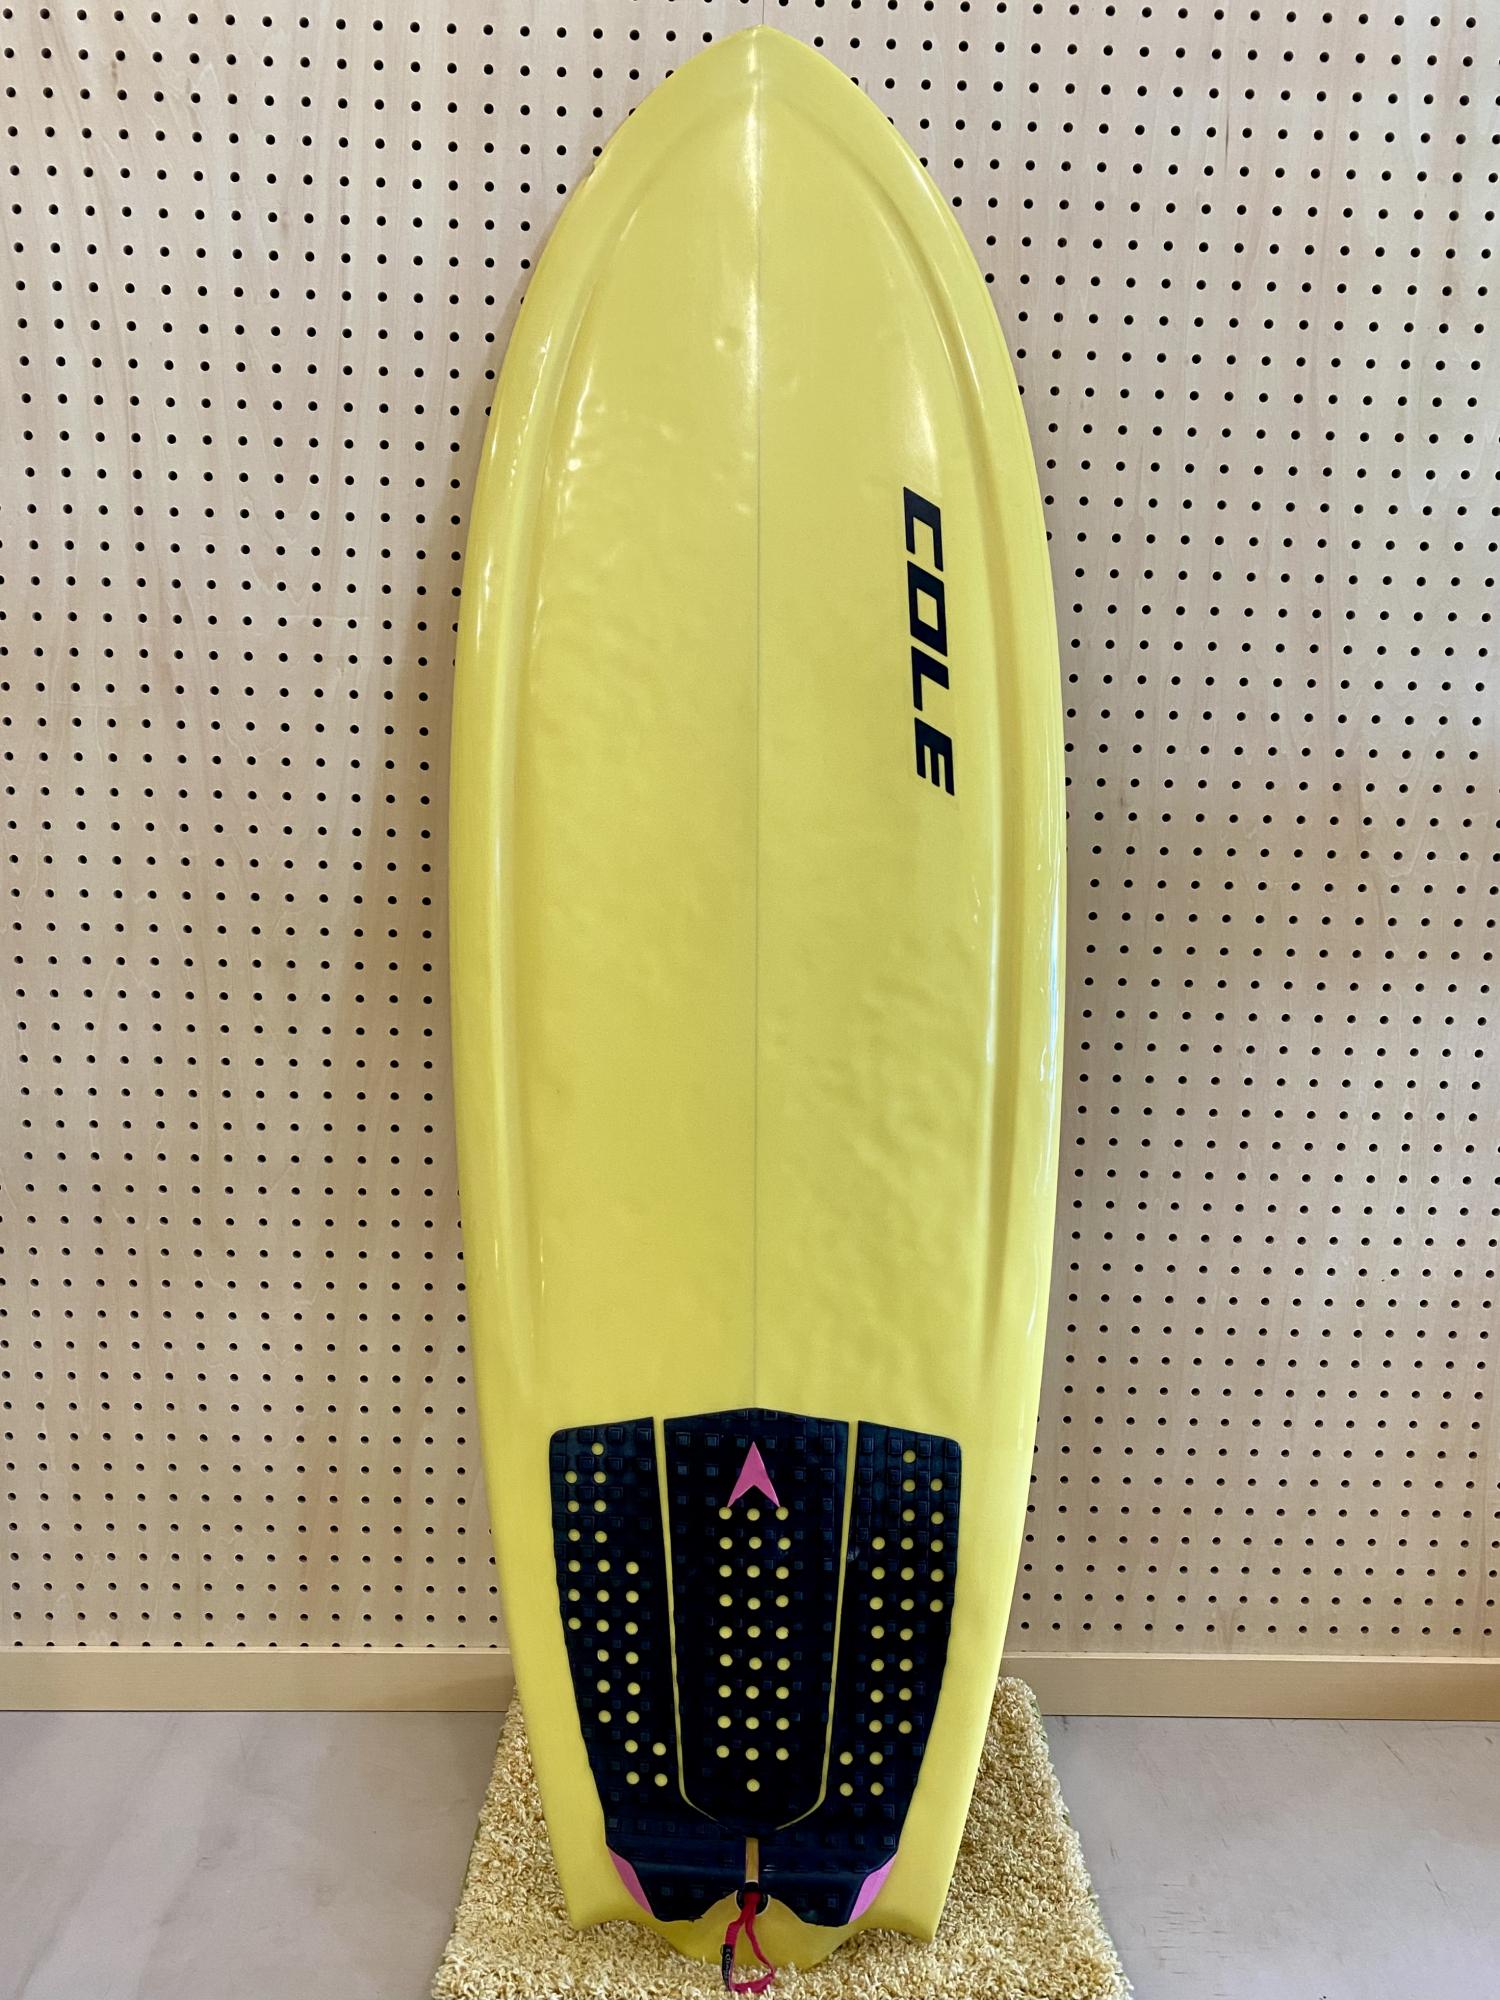 USED BOARDS (BD3 5.0 COLE SURFBOARDS)